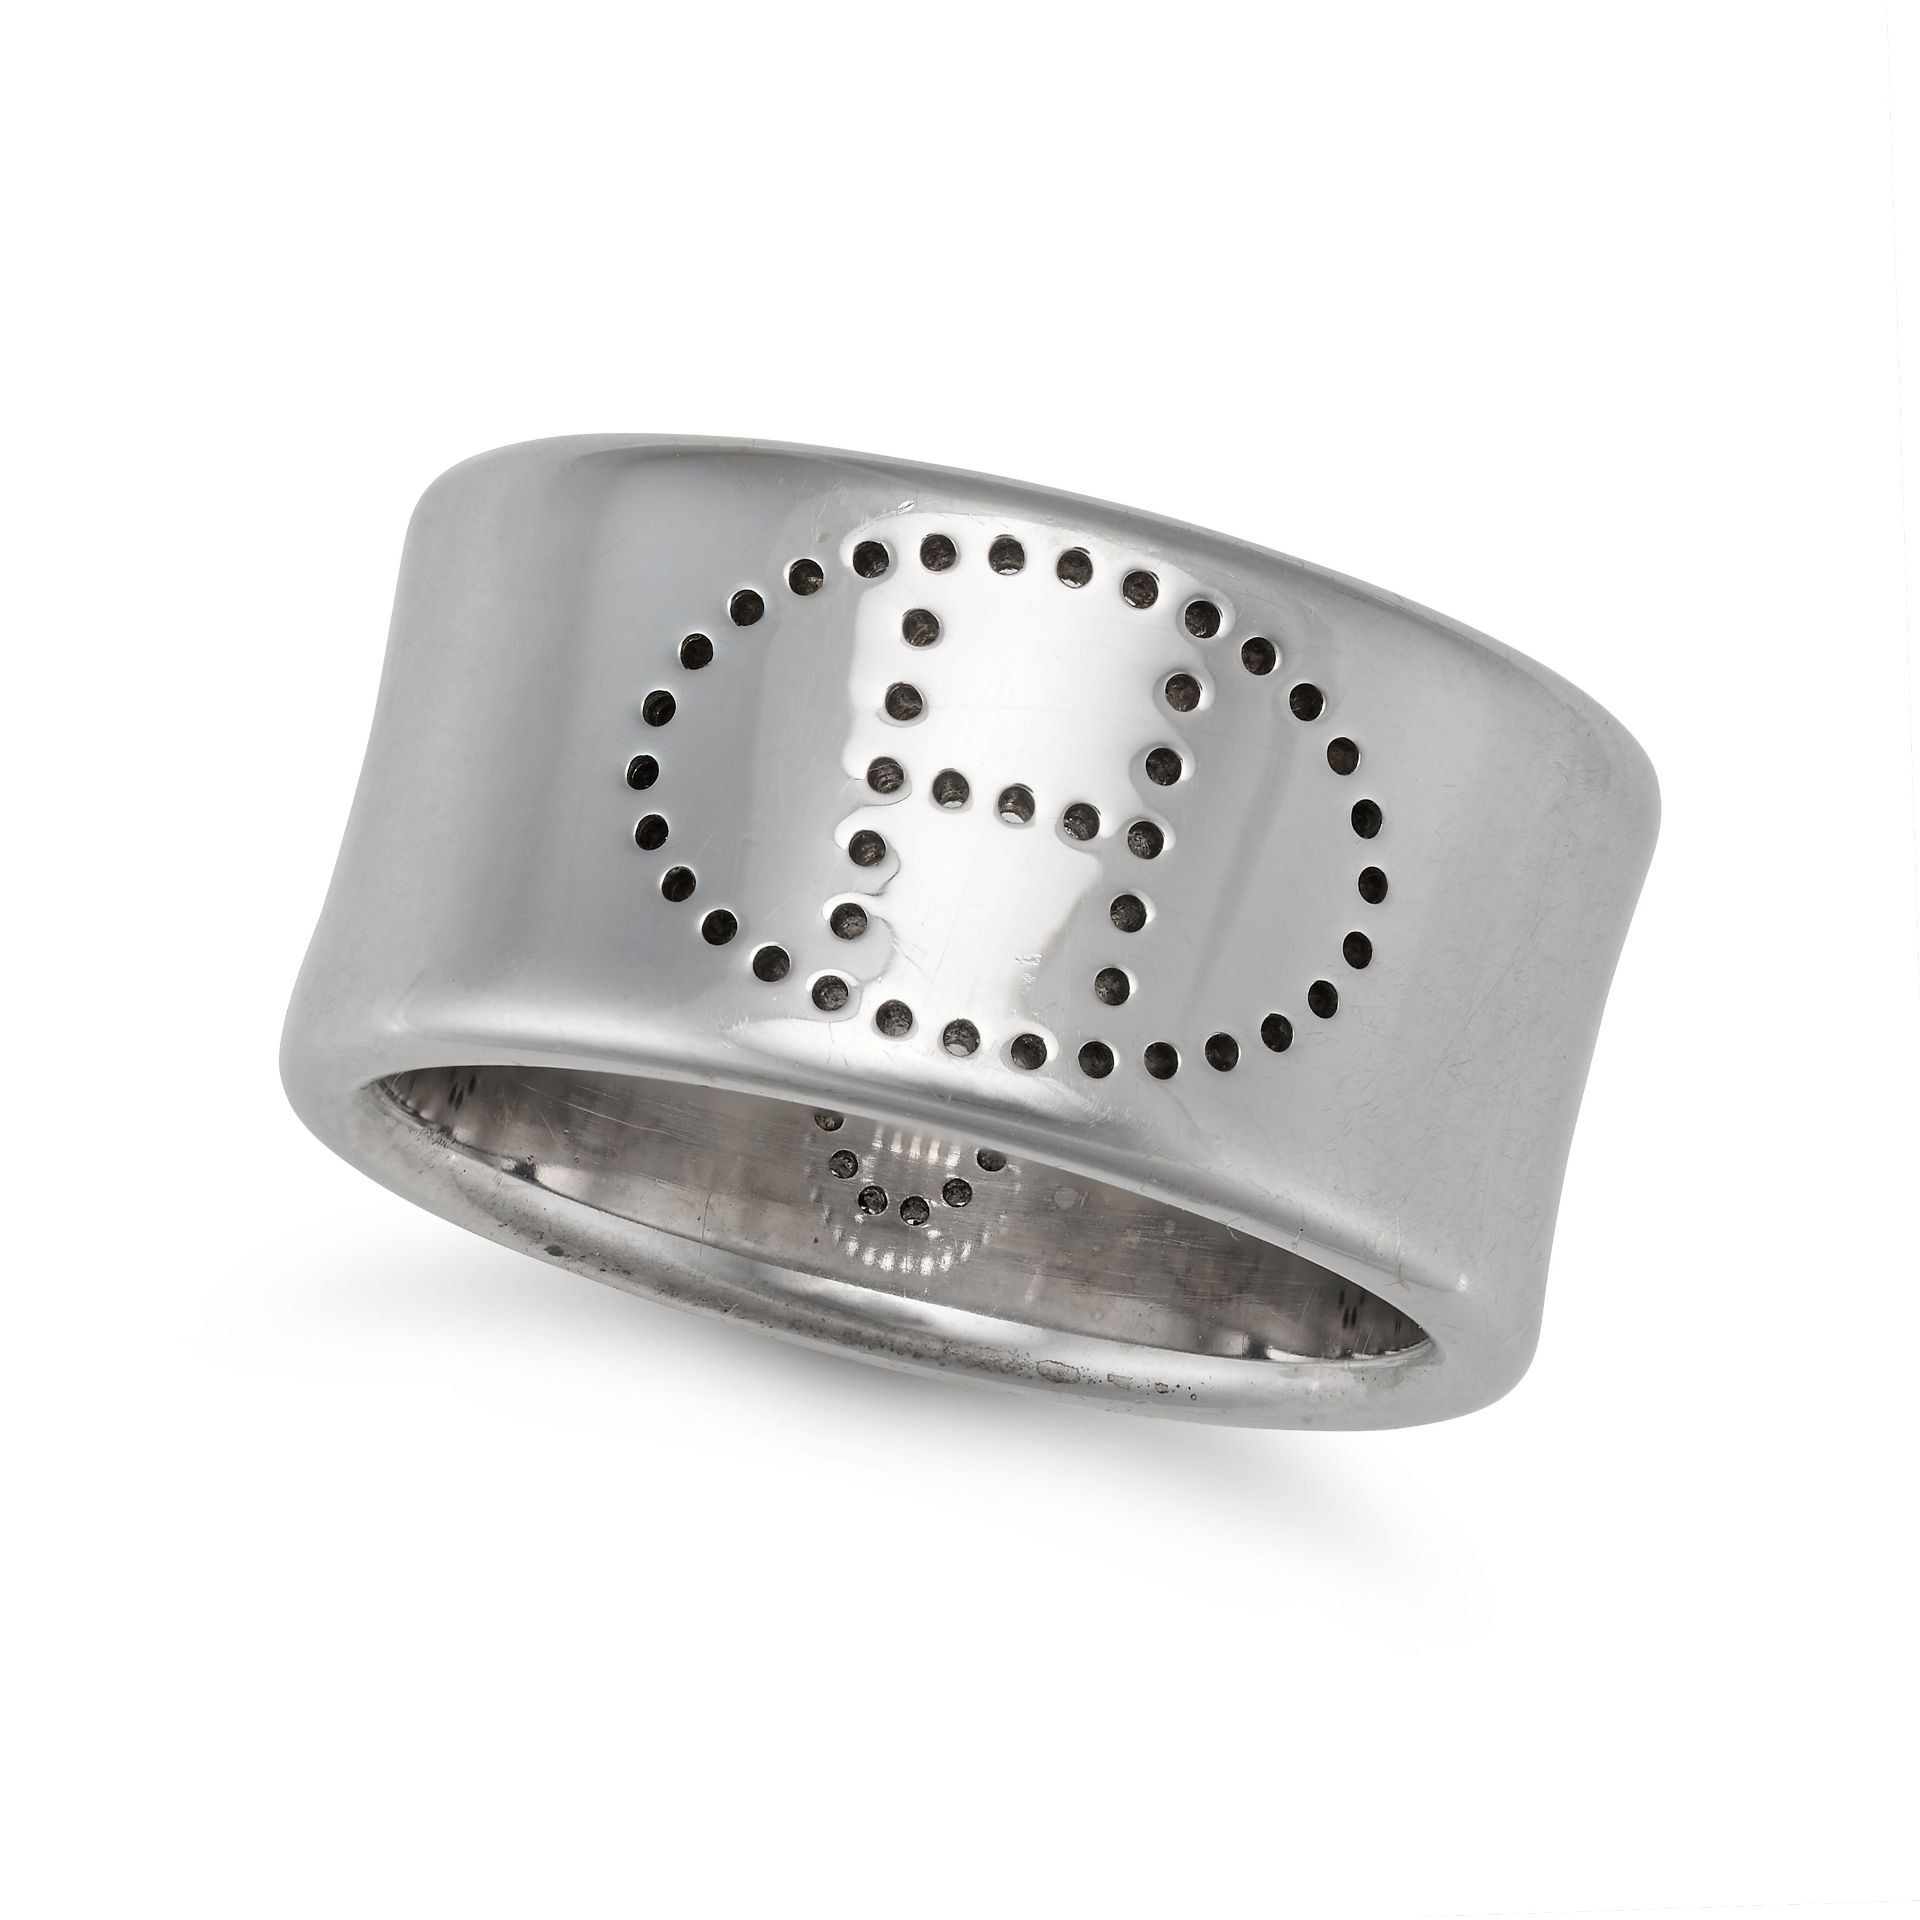 HERMES, A PERFORATED H STERLING SILVER RING, signed 'Hermes', size N, 13g. Includes original box.